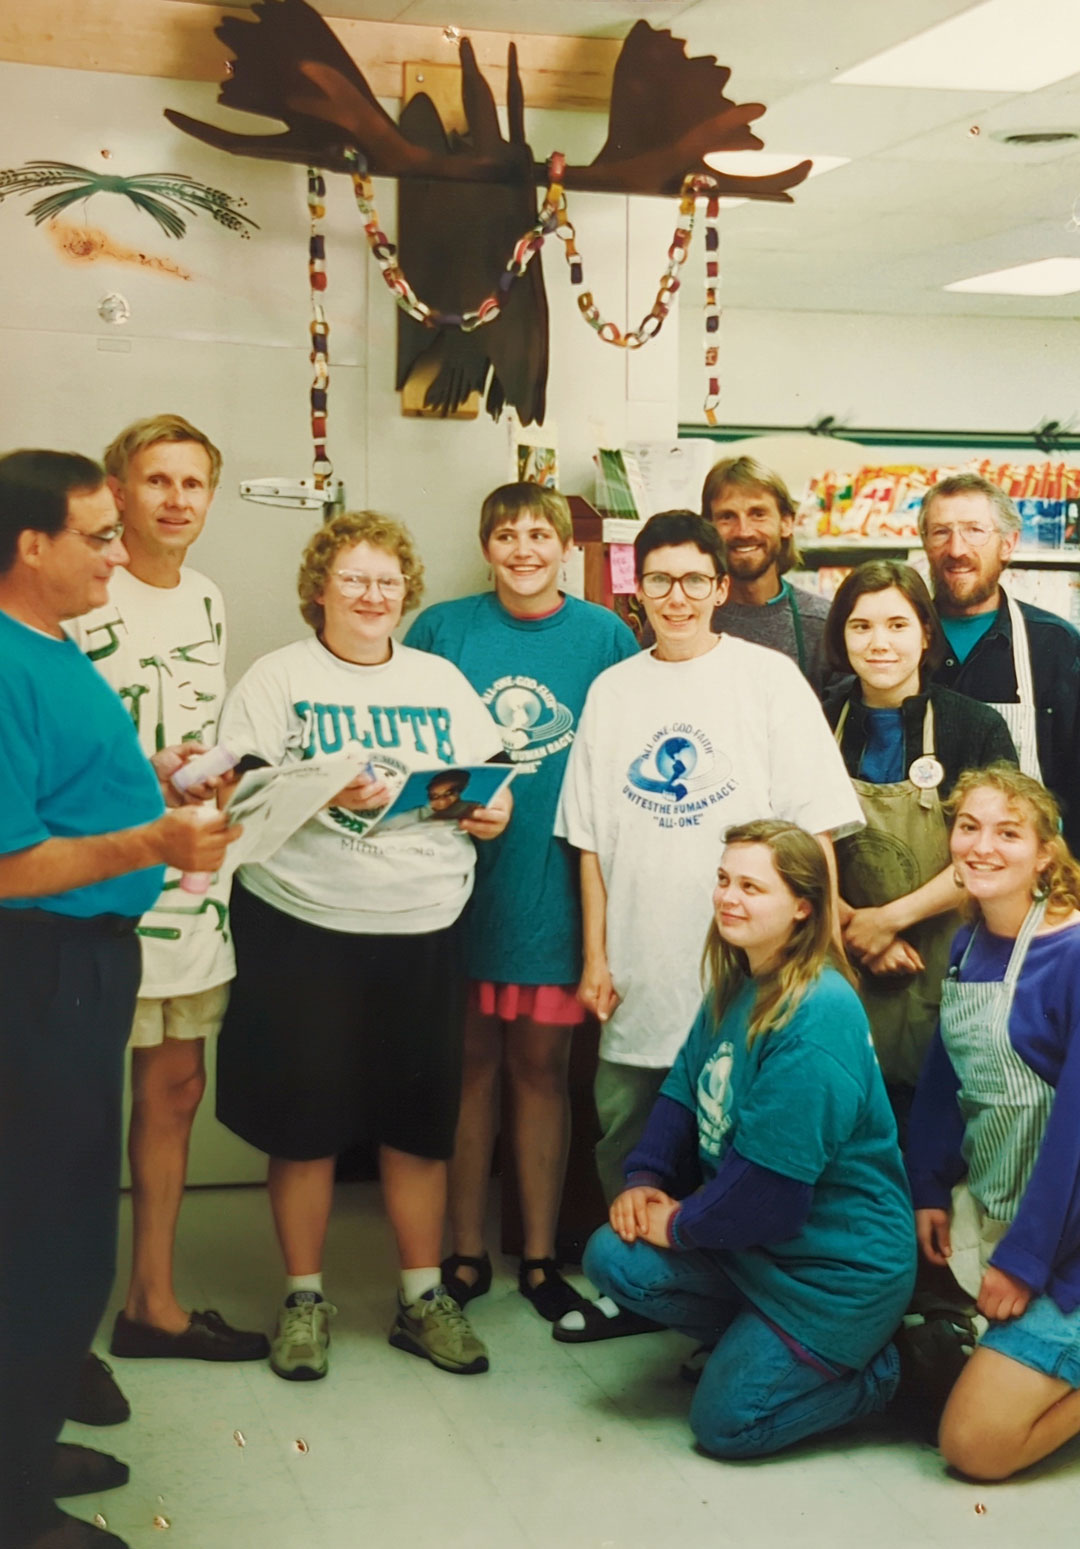 A group of nine adults, casually dressed, pose together in a room decorated with a moose head and colorful chains. Some are wearing event T-shirts from the Whole Foods Coop Duluth MN, and one person holds a magazine. They appear cheerful and are positioned in both standing and crouching stances.